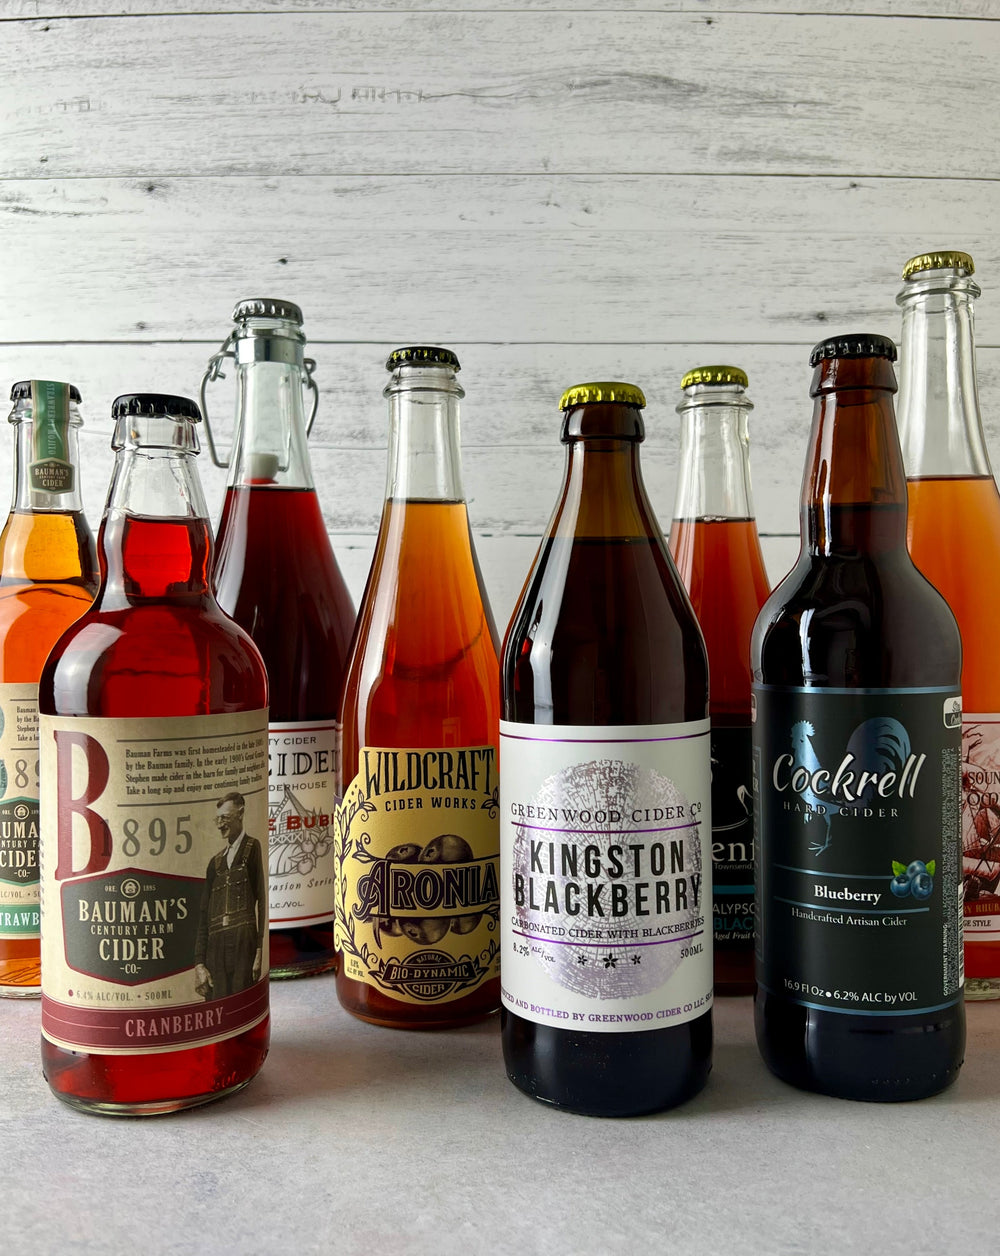 Multiple bottles of fruited cider, including Bauman's Strawberry Mojito, Bauman's Cranberry, Sea Cider Bramble Bubbly, Wildcraft Aronia, Greenwood Kingston Blackberry, and Cockrell Blueberry